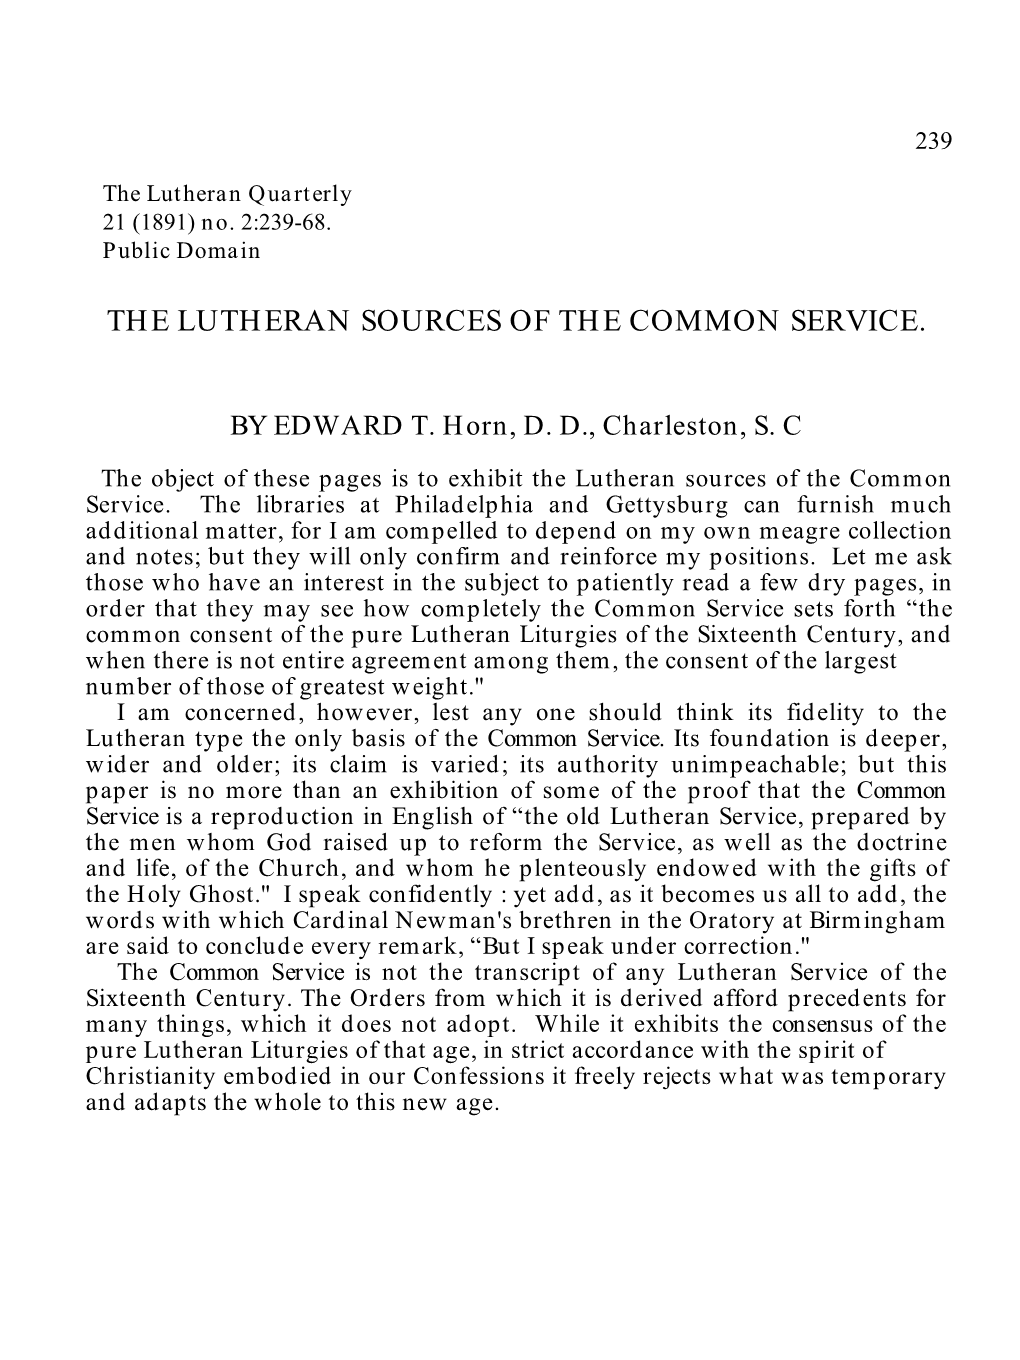 The Lutheran Sources of the Common Service